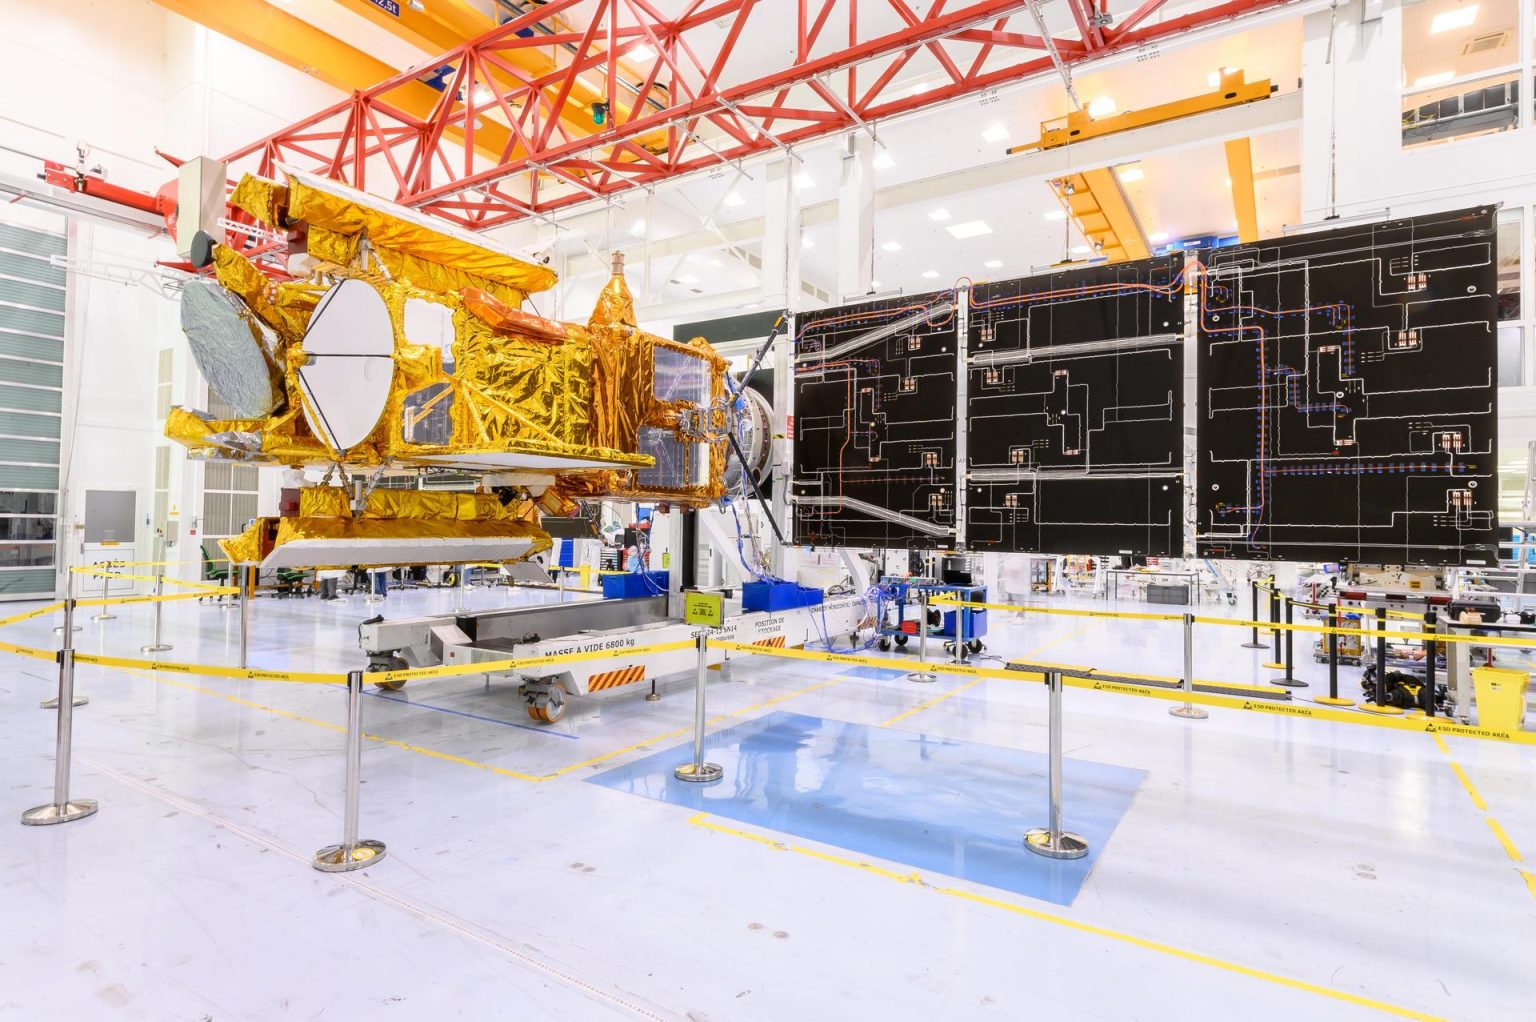 A SpaceX Falcon 9 rocket will launch the Surface Water and Ocean Topography (SWOT) satellite from Space Launch Complex-4 East at Vandenberg Space Force Base in California, on Monday, Dec. 5, 2022. Photo credit: CNES/Thales Alenia Space
